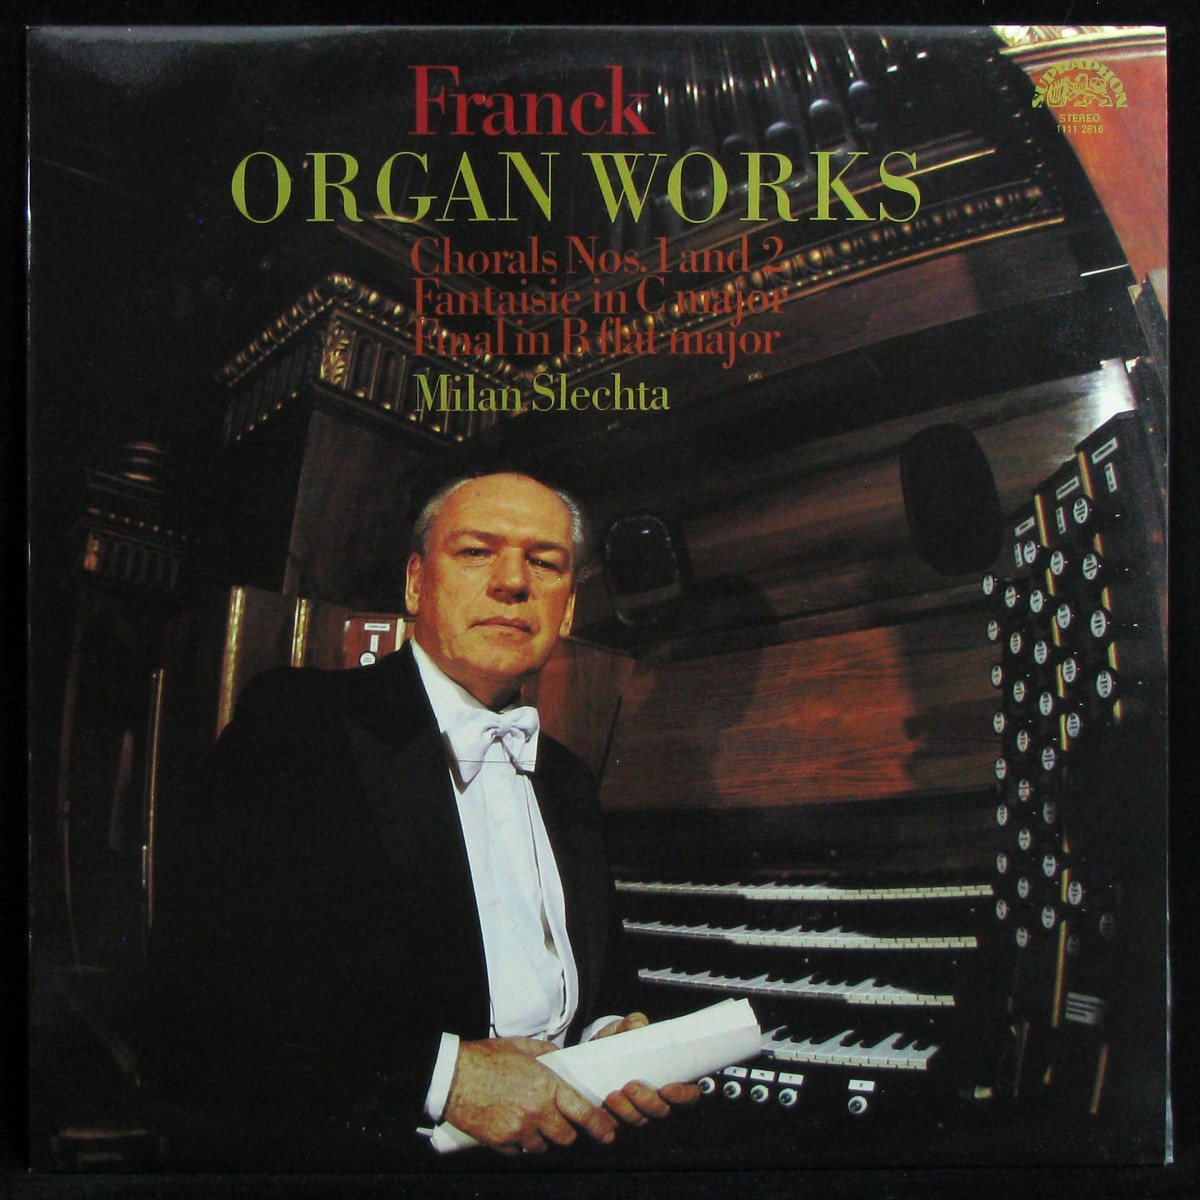 Franck: Organ Works (Chorals Nos. 1 And 2 / Fantaisie In C Major / Final In B Flat Major)